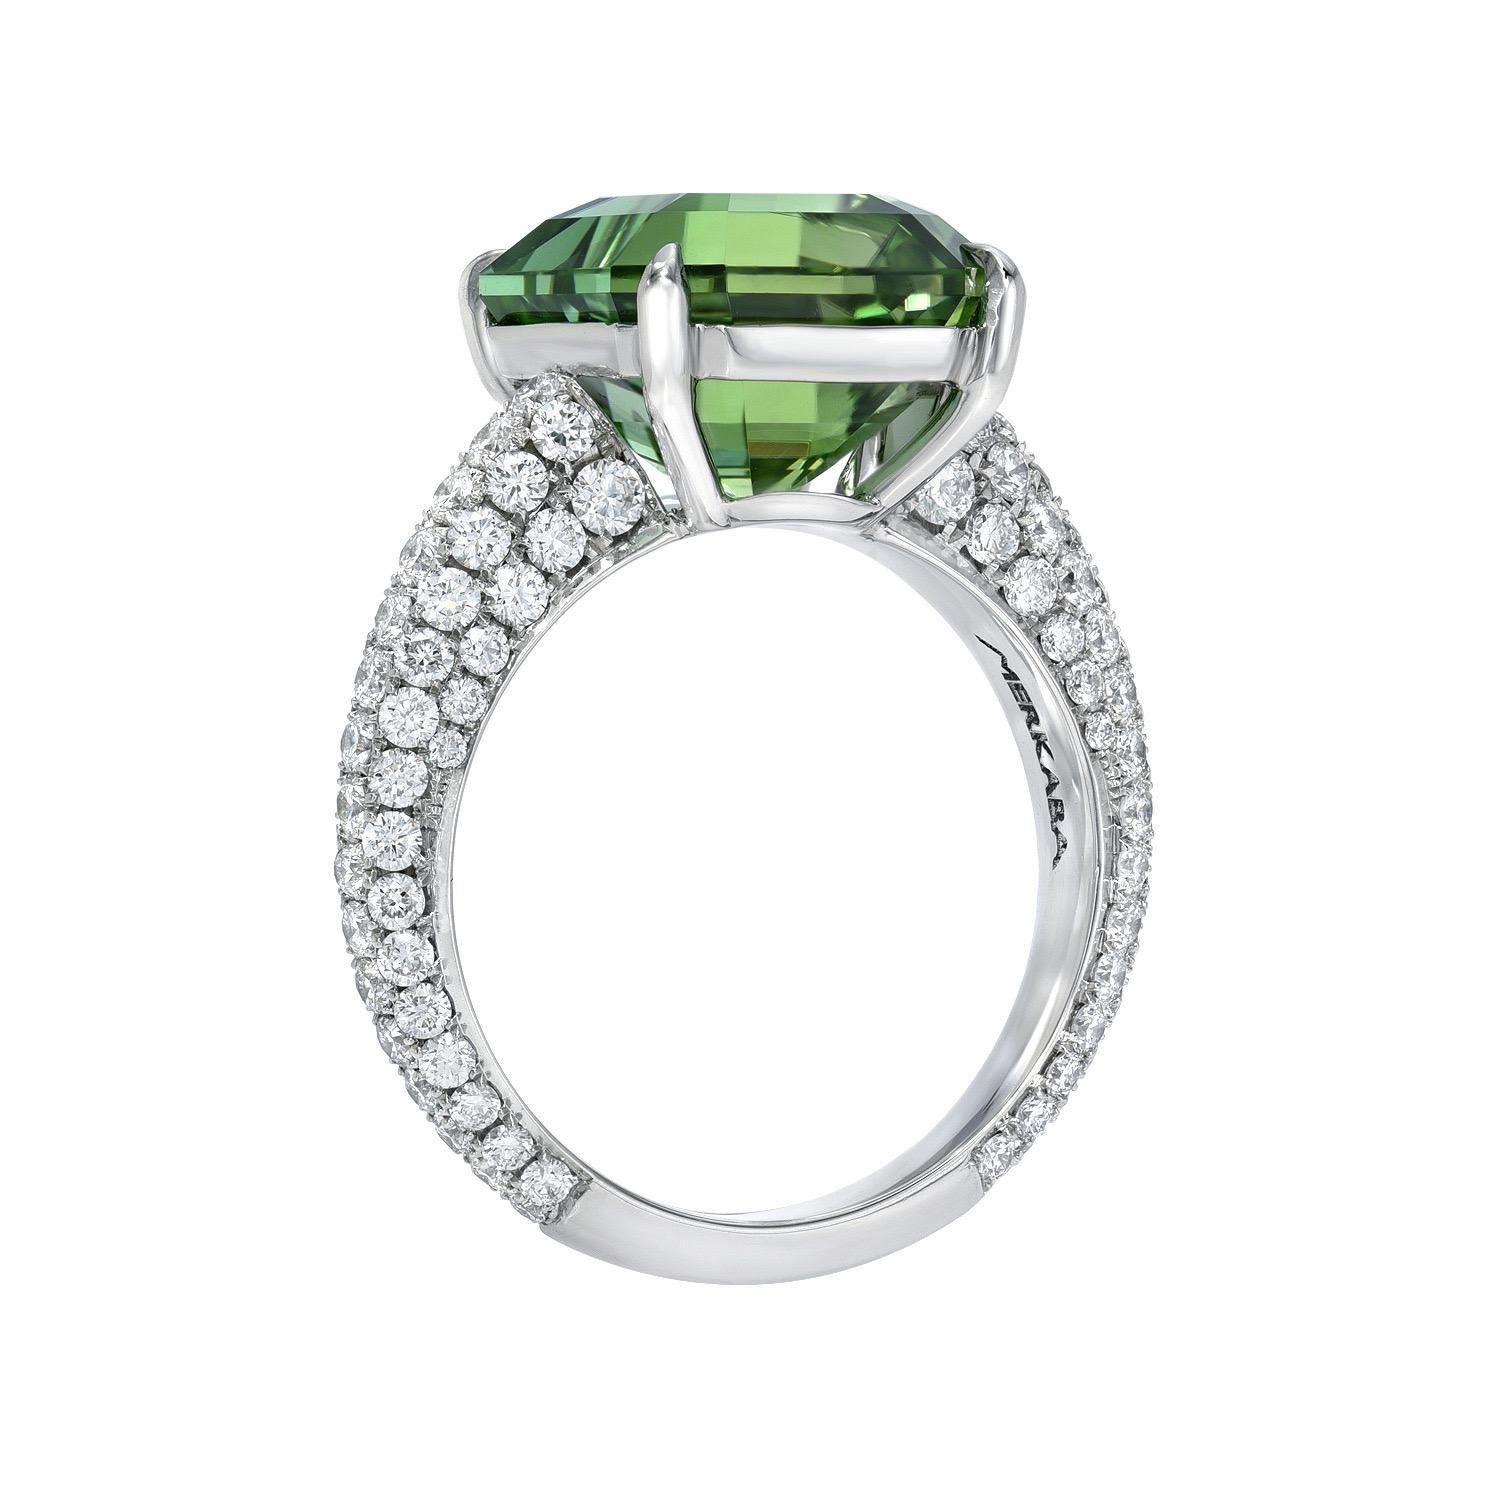 Notable 7.10 carat Mint Green Tourmaline emerald-cut, platinum ring, decorated by a total of 1.34 carat, round brilliant, collection diamonds.
Ring size 6. Resizing is complementary upon request.
Crafted by extremely skilled hands in the